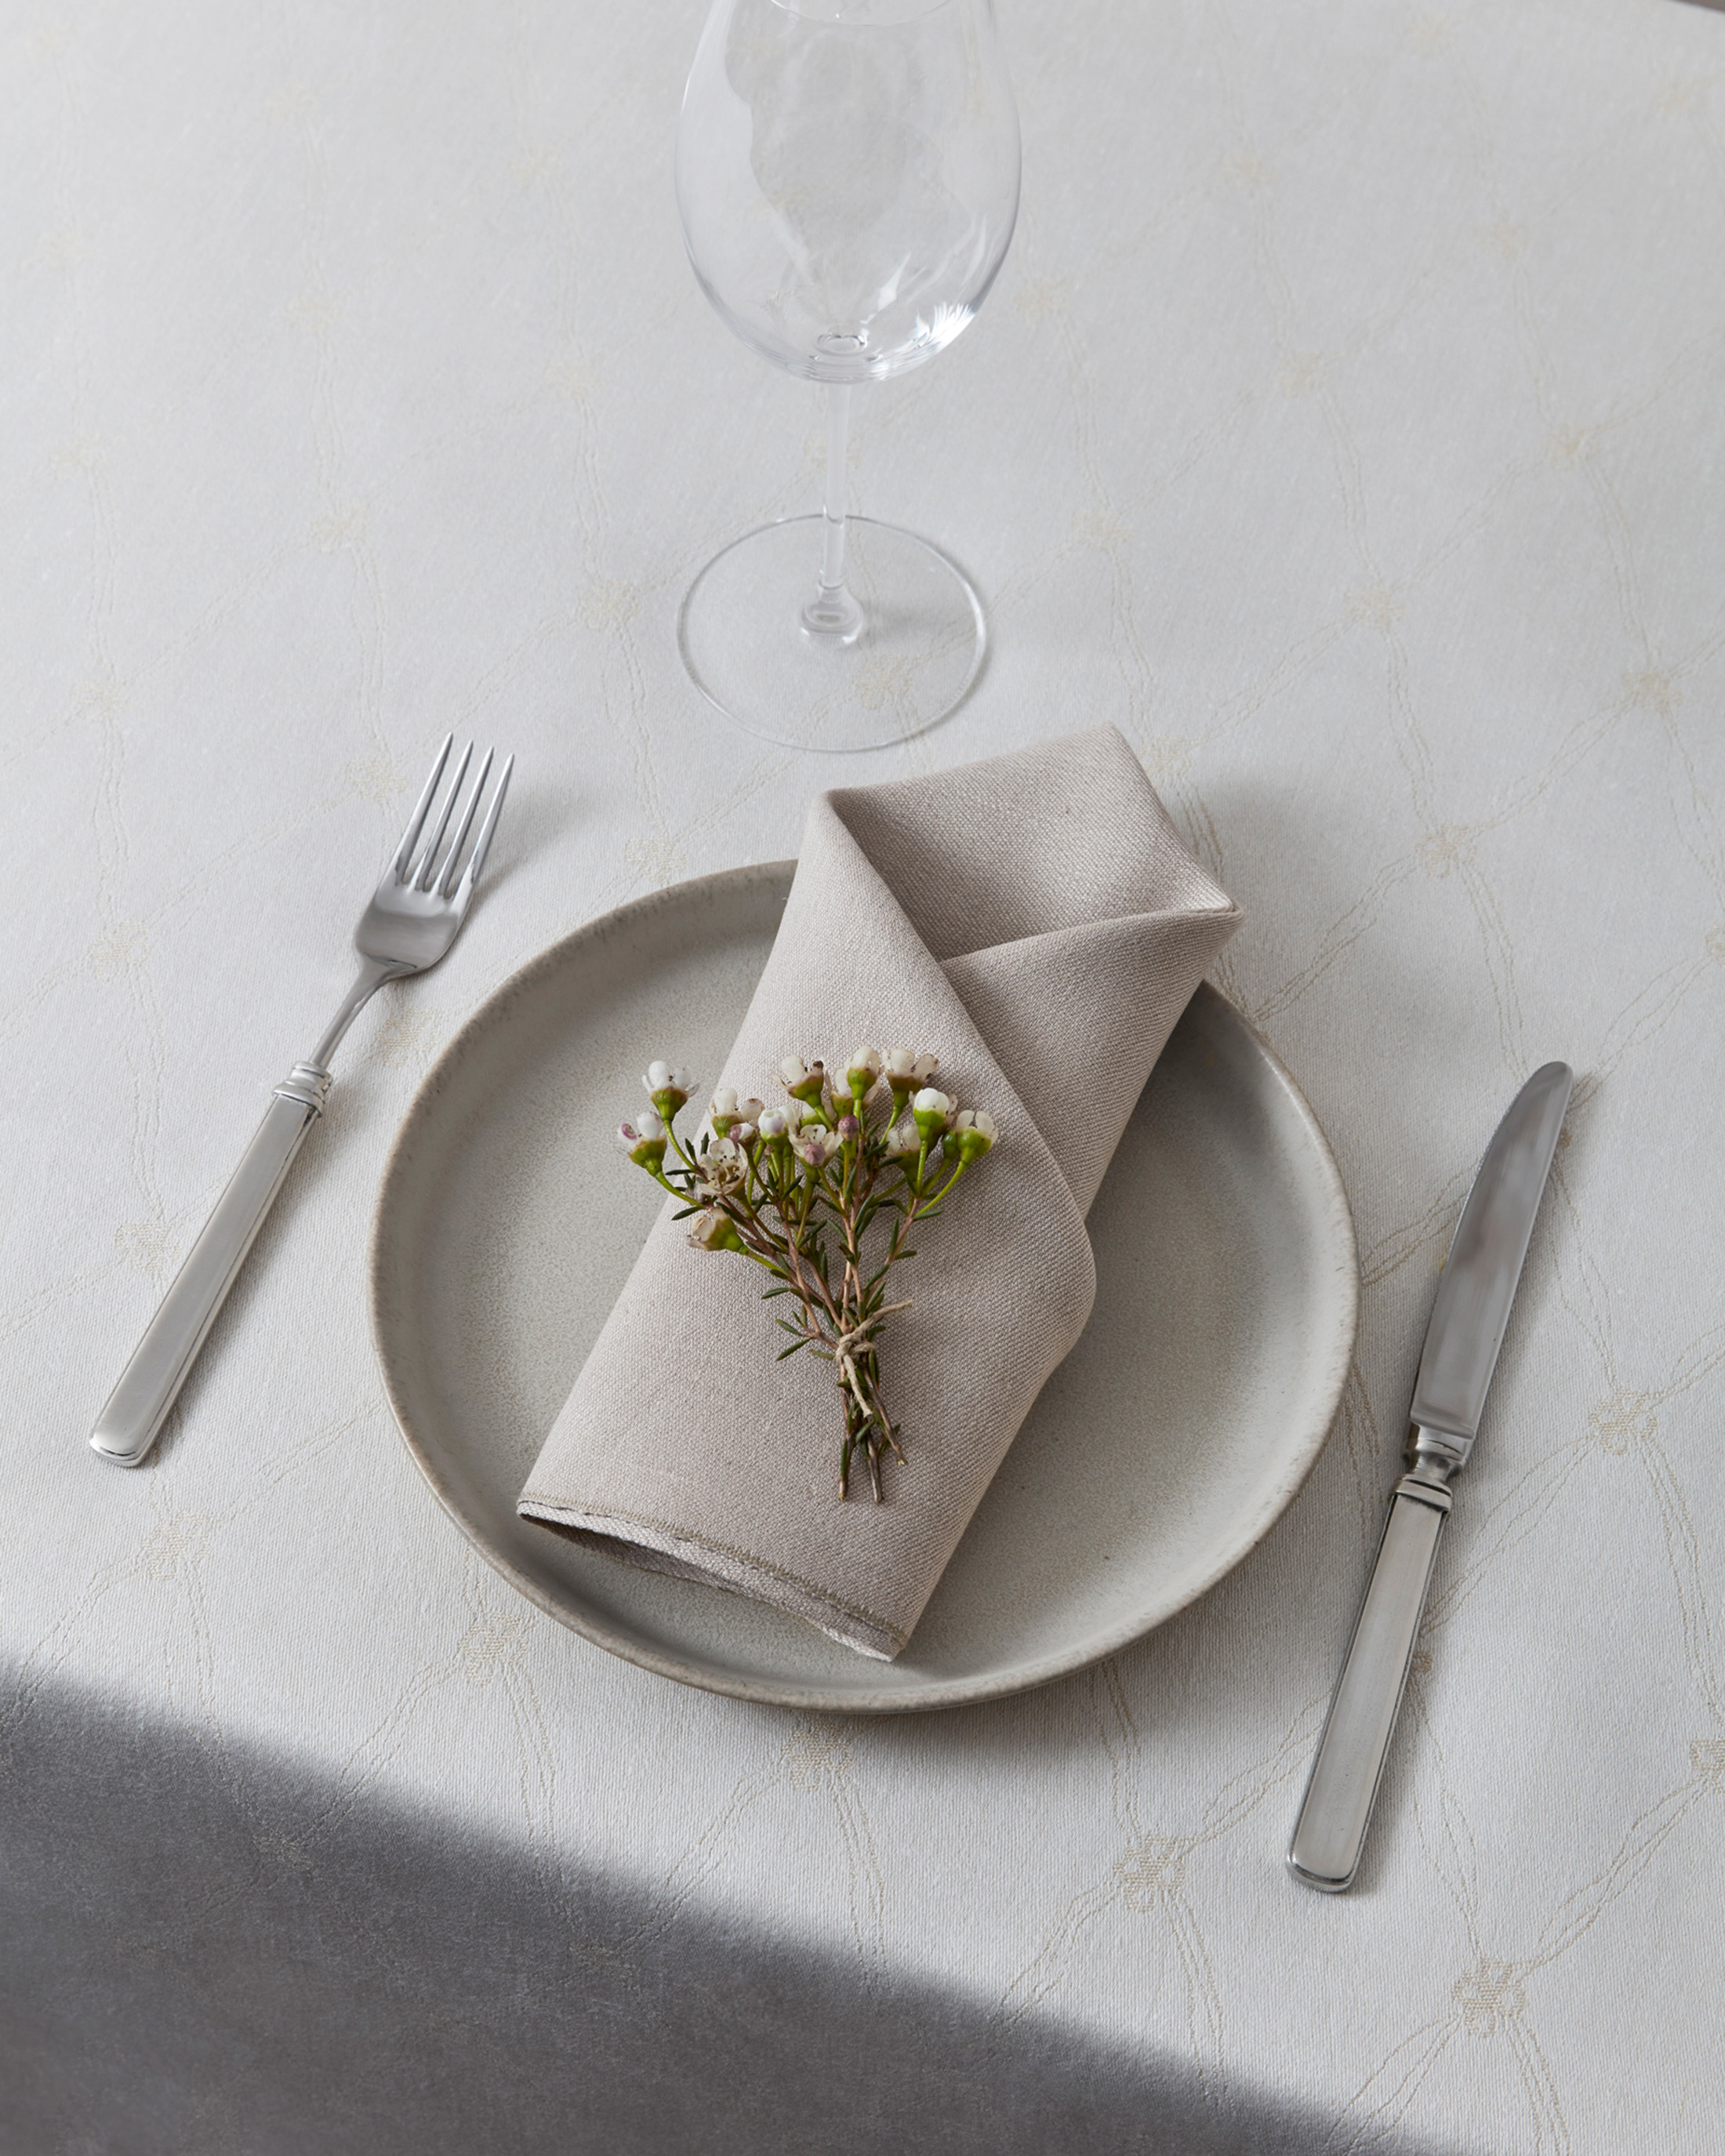 Iv Klöver canvas in the color champagne. Table setting with fork and knife as well as plate and napkin. Wine glass and a flower on the napkin. 